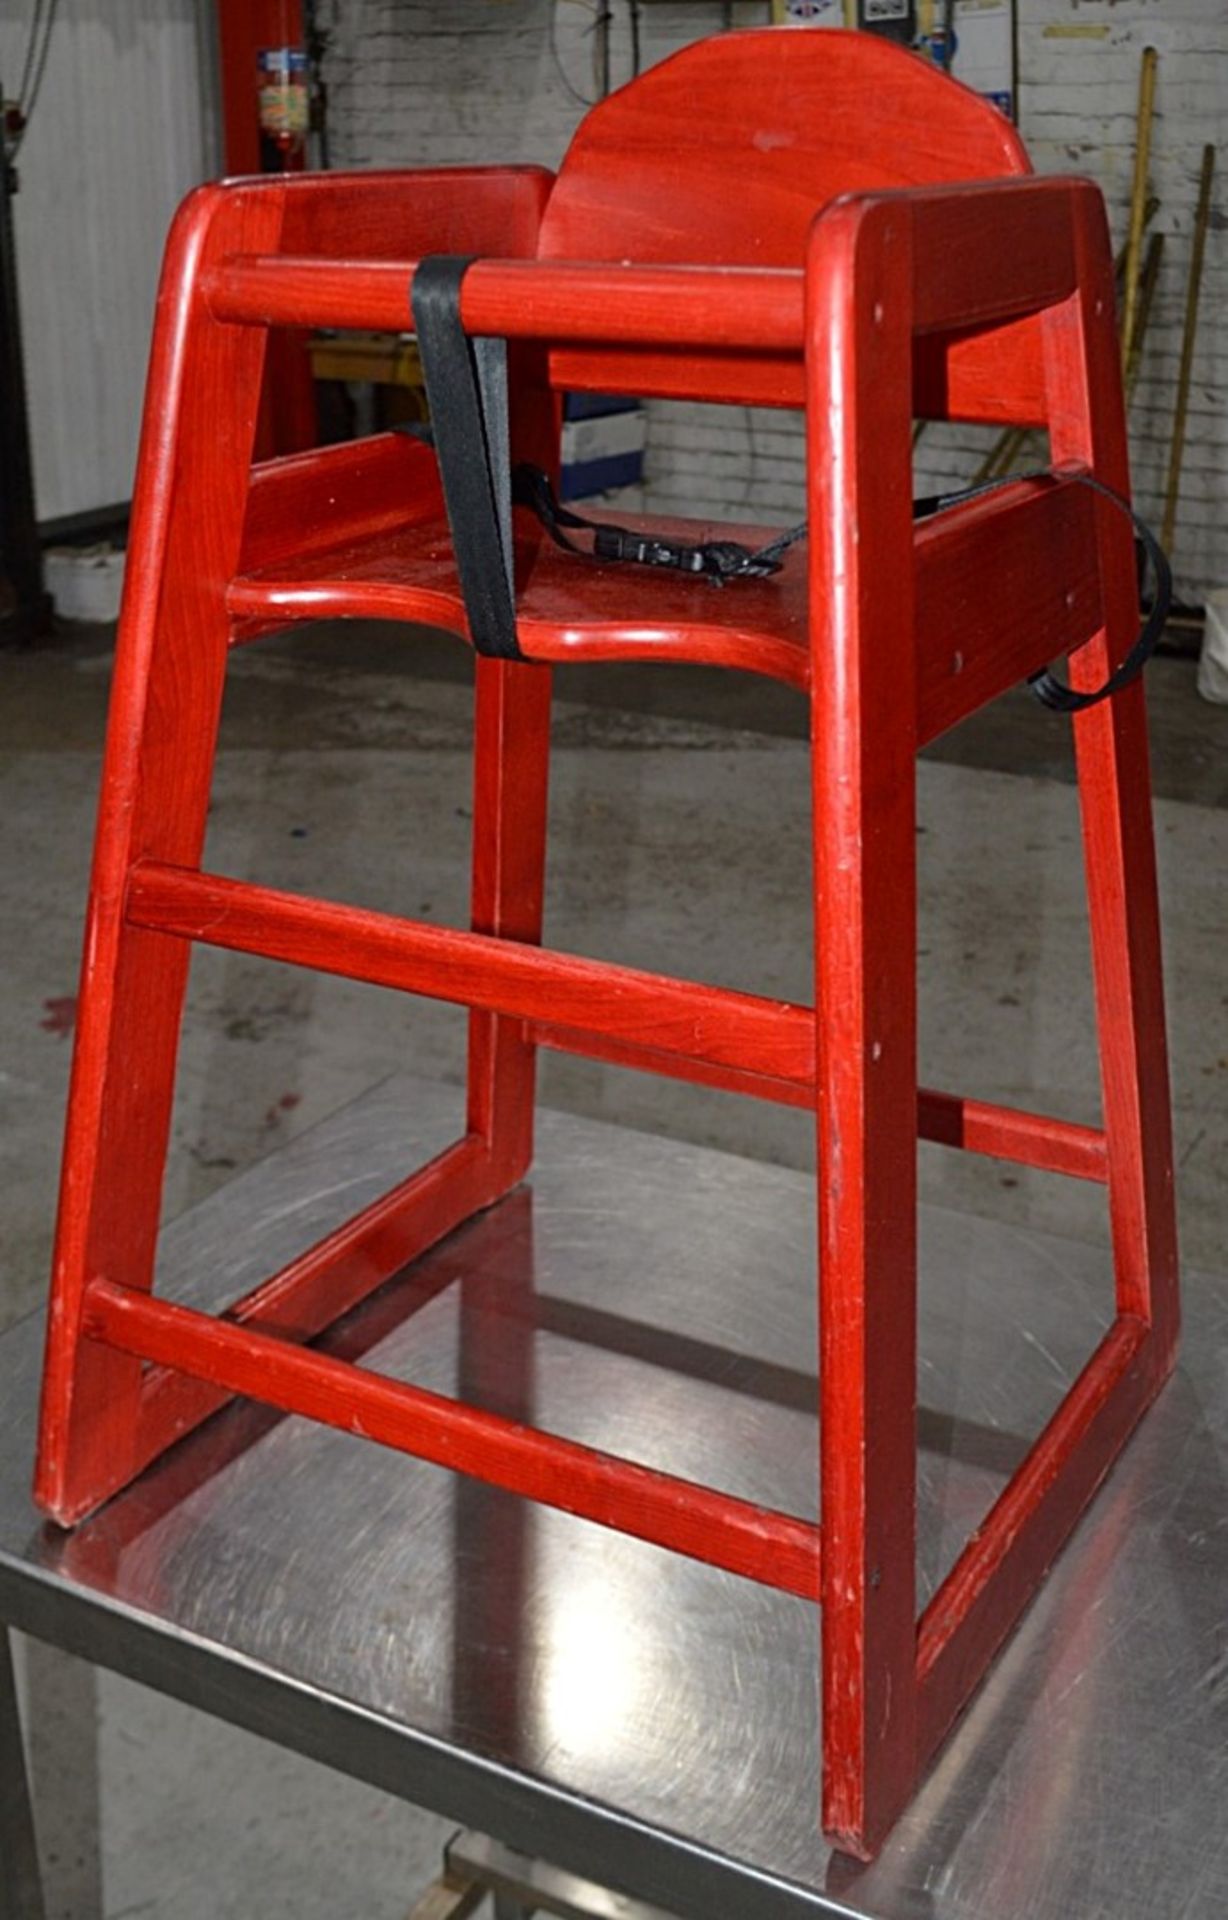 4 x FAMEG Baby High Chairs In Red - Dimensions: Width 48 x Depth 48 x Back Height 75cm, Seat 50cm - Image 6 of 8